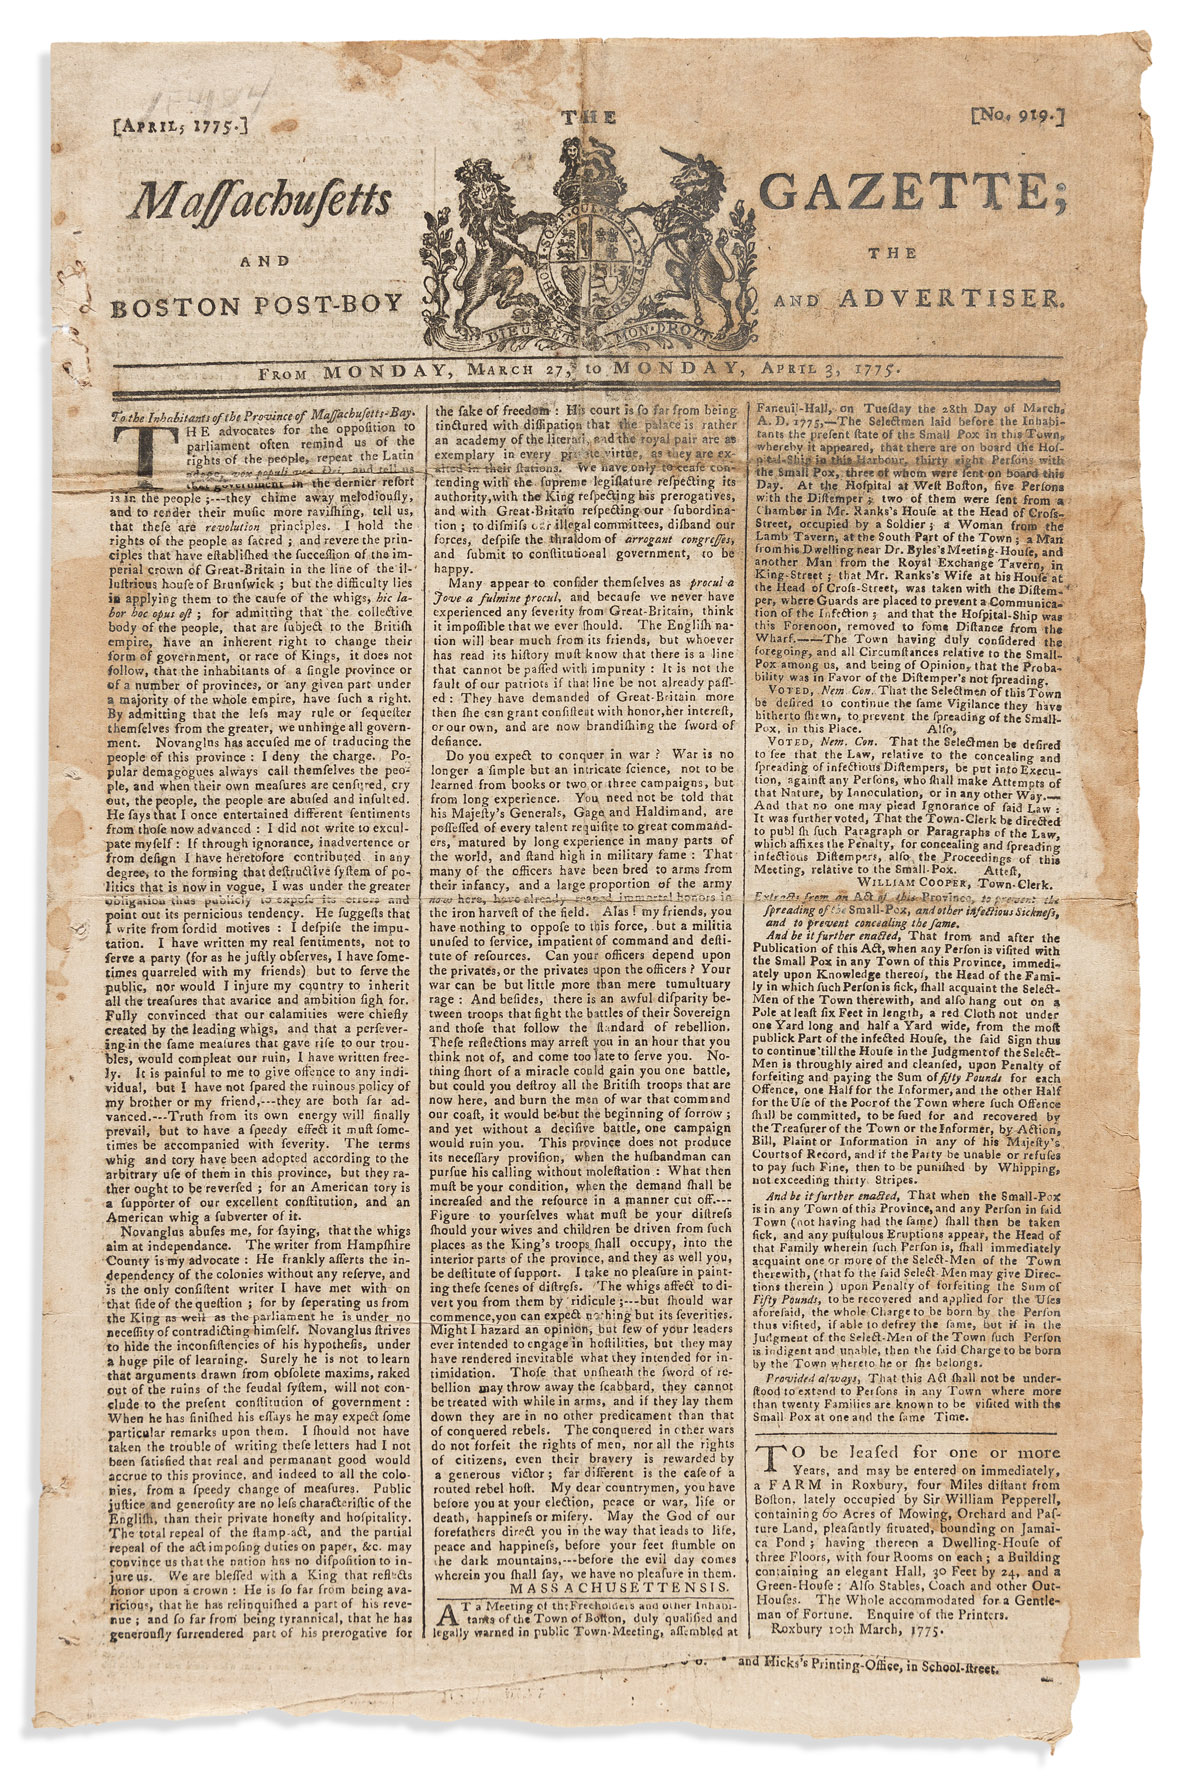 (AMERICAN REVOLUTION--1775.) Issue of the Massachusetts Gazette, two weeks before Lexington and Concord.